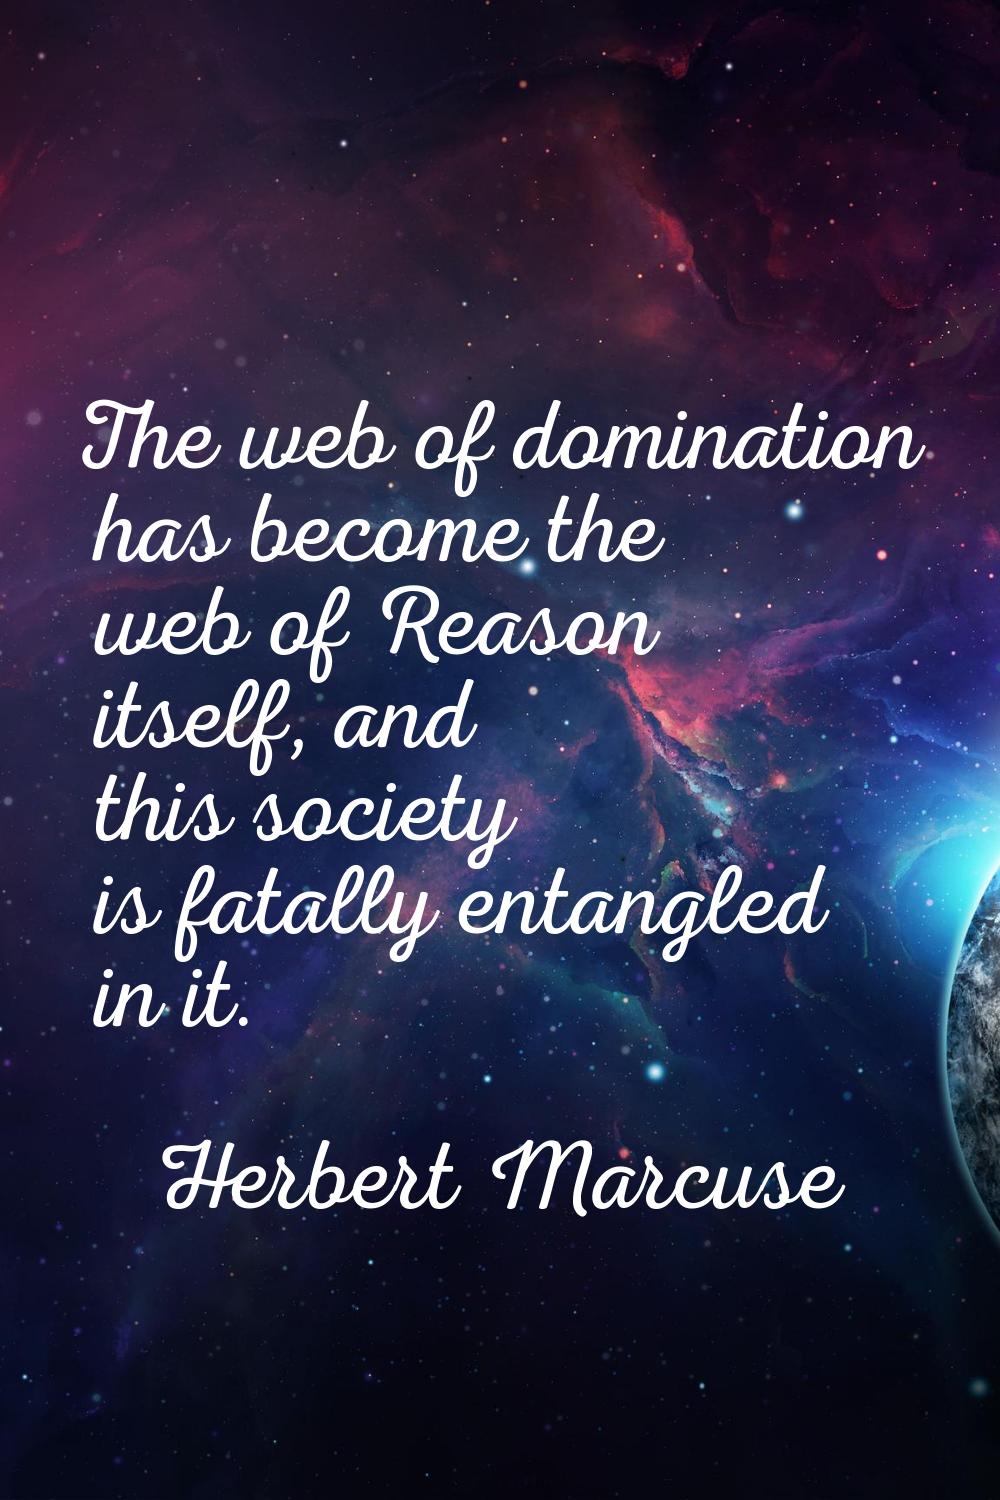 The web of domination has become the web of Reason itself, and this society is fatally entangled in